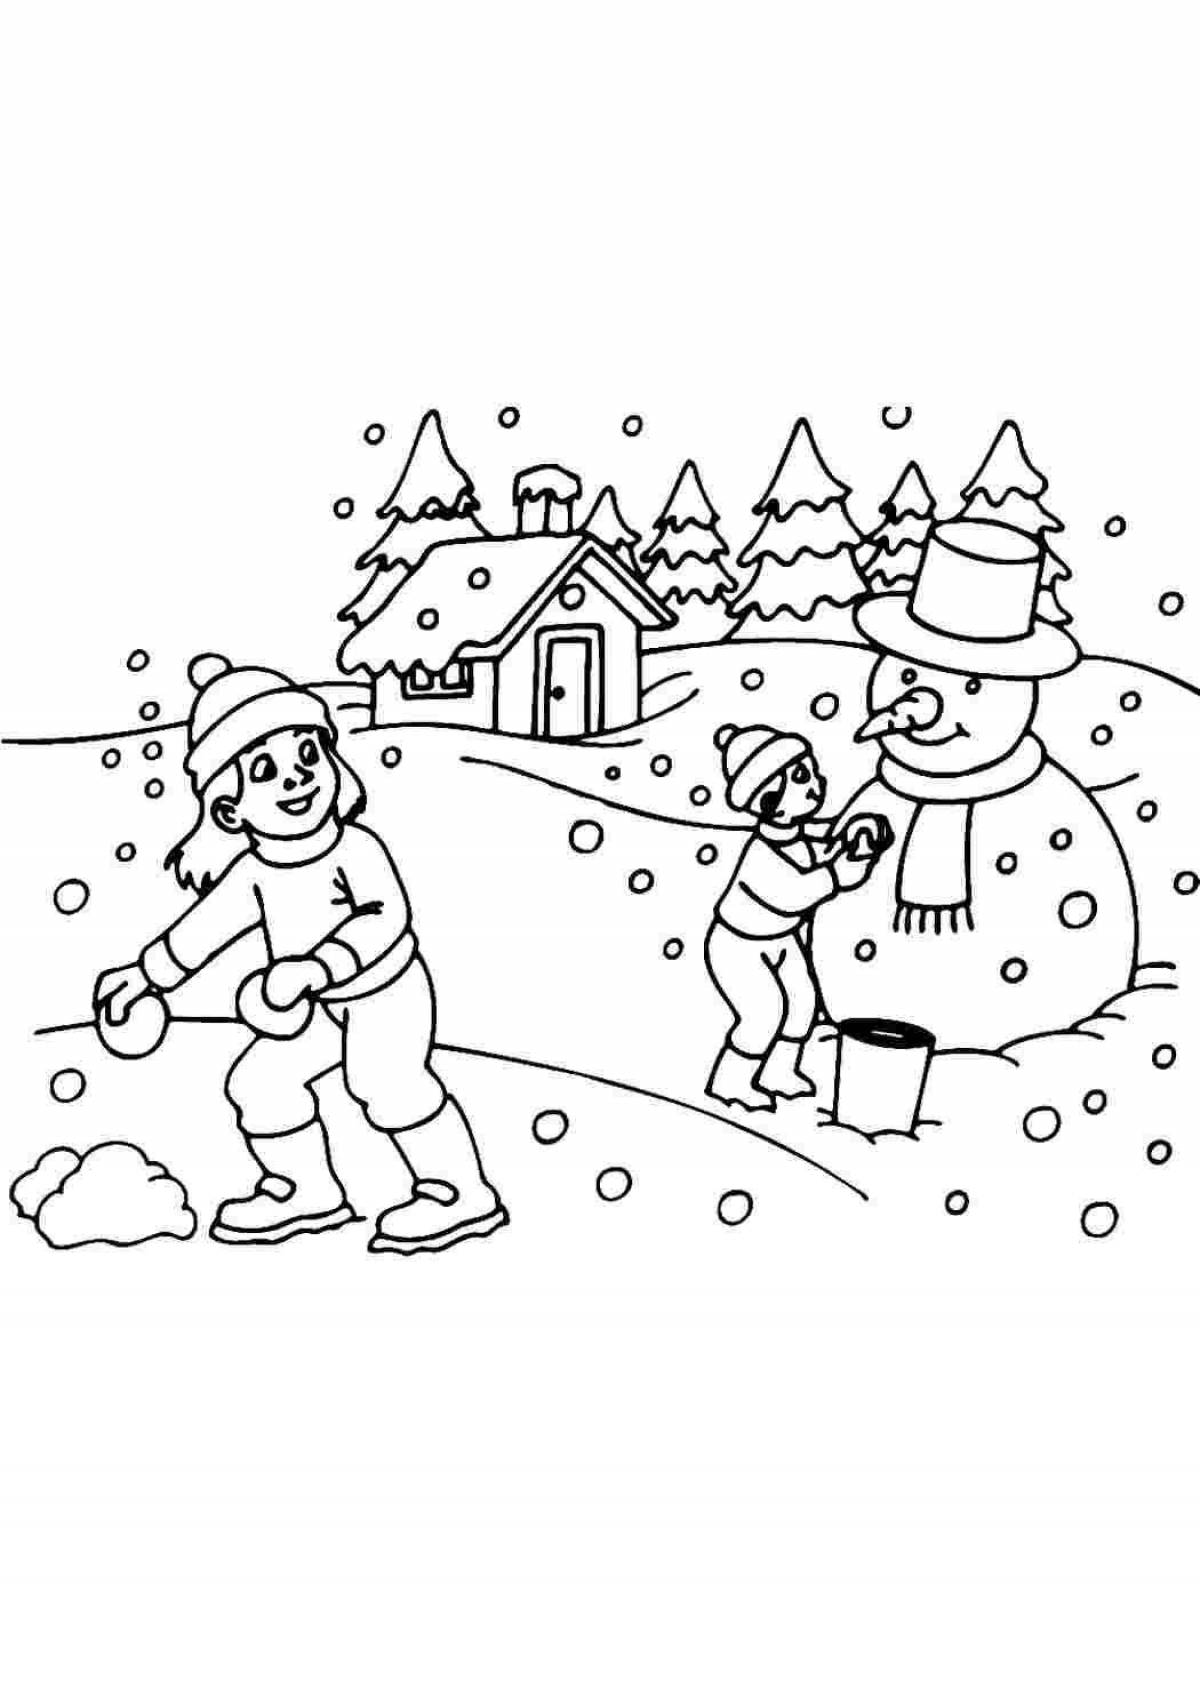 Large winter landscape coloring for children 3-4 years old